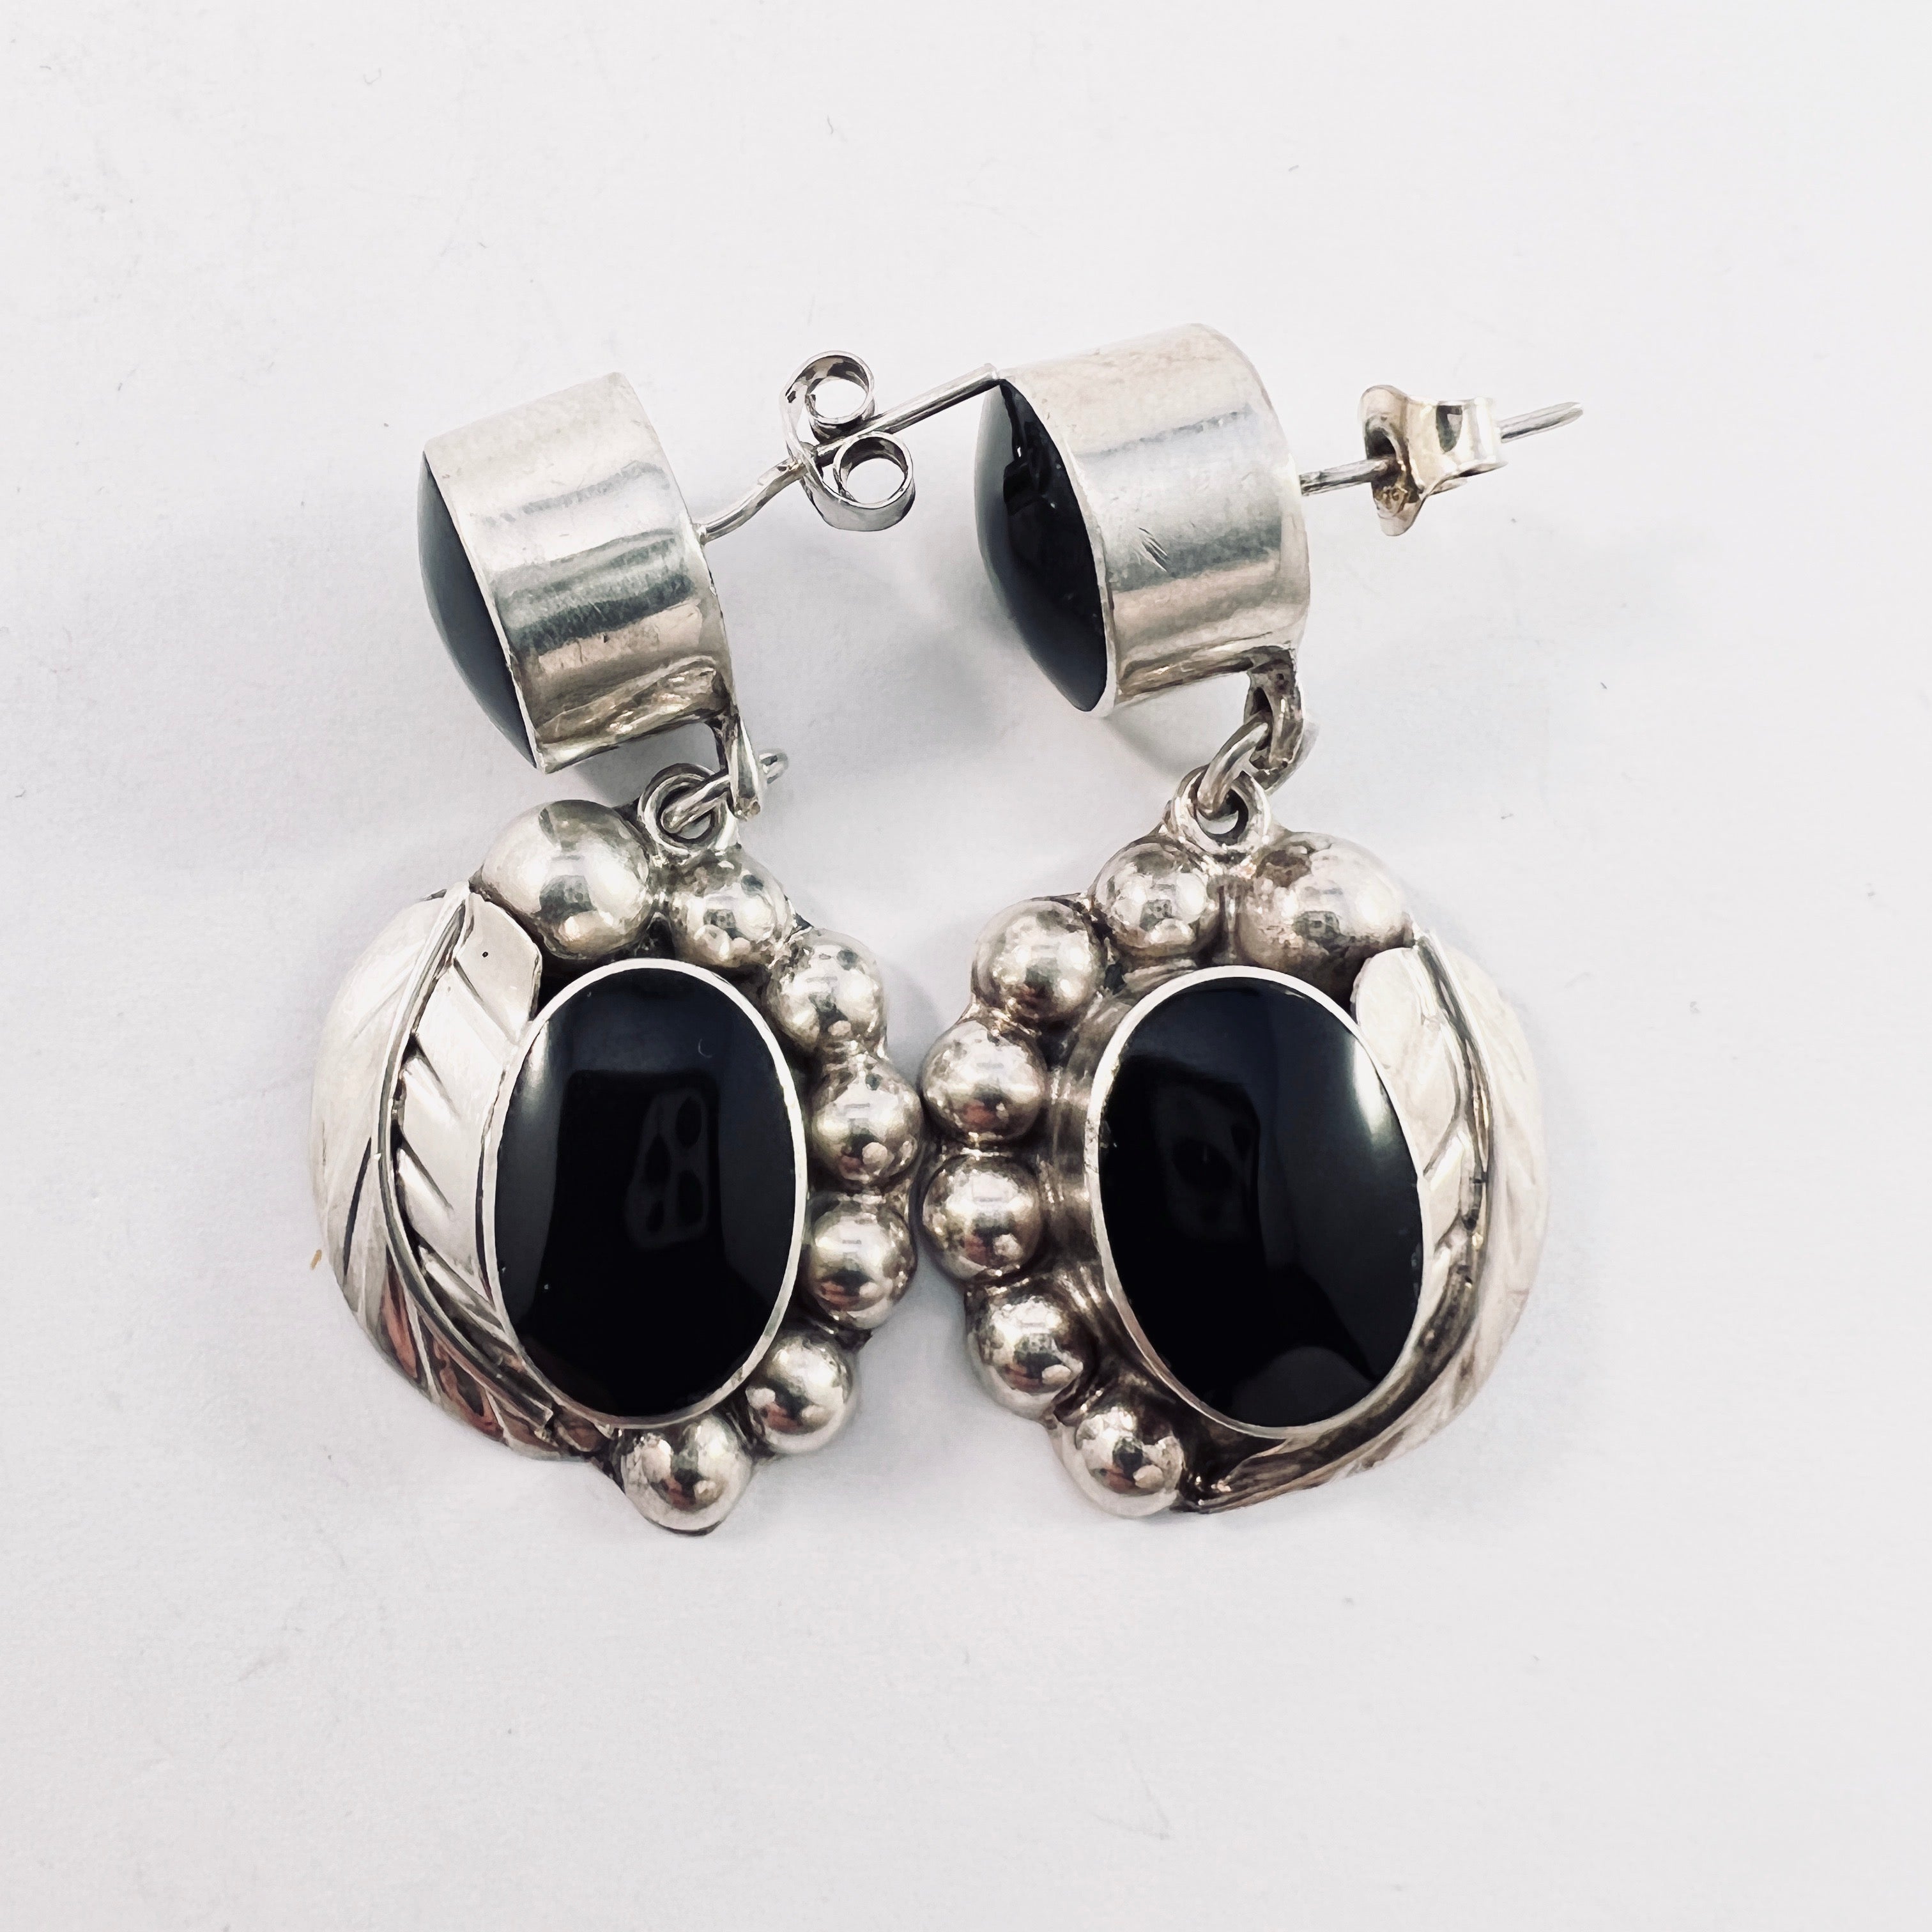 Mexico, Large Vintage Sterling Silver Onyx Earrings.